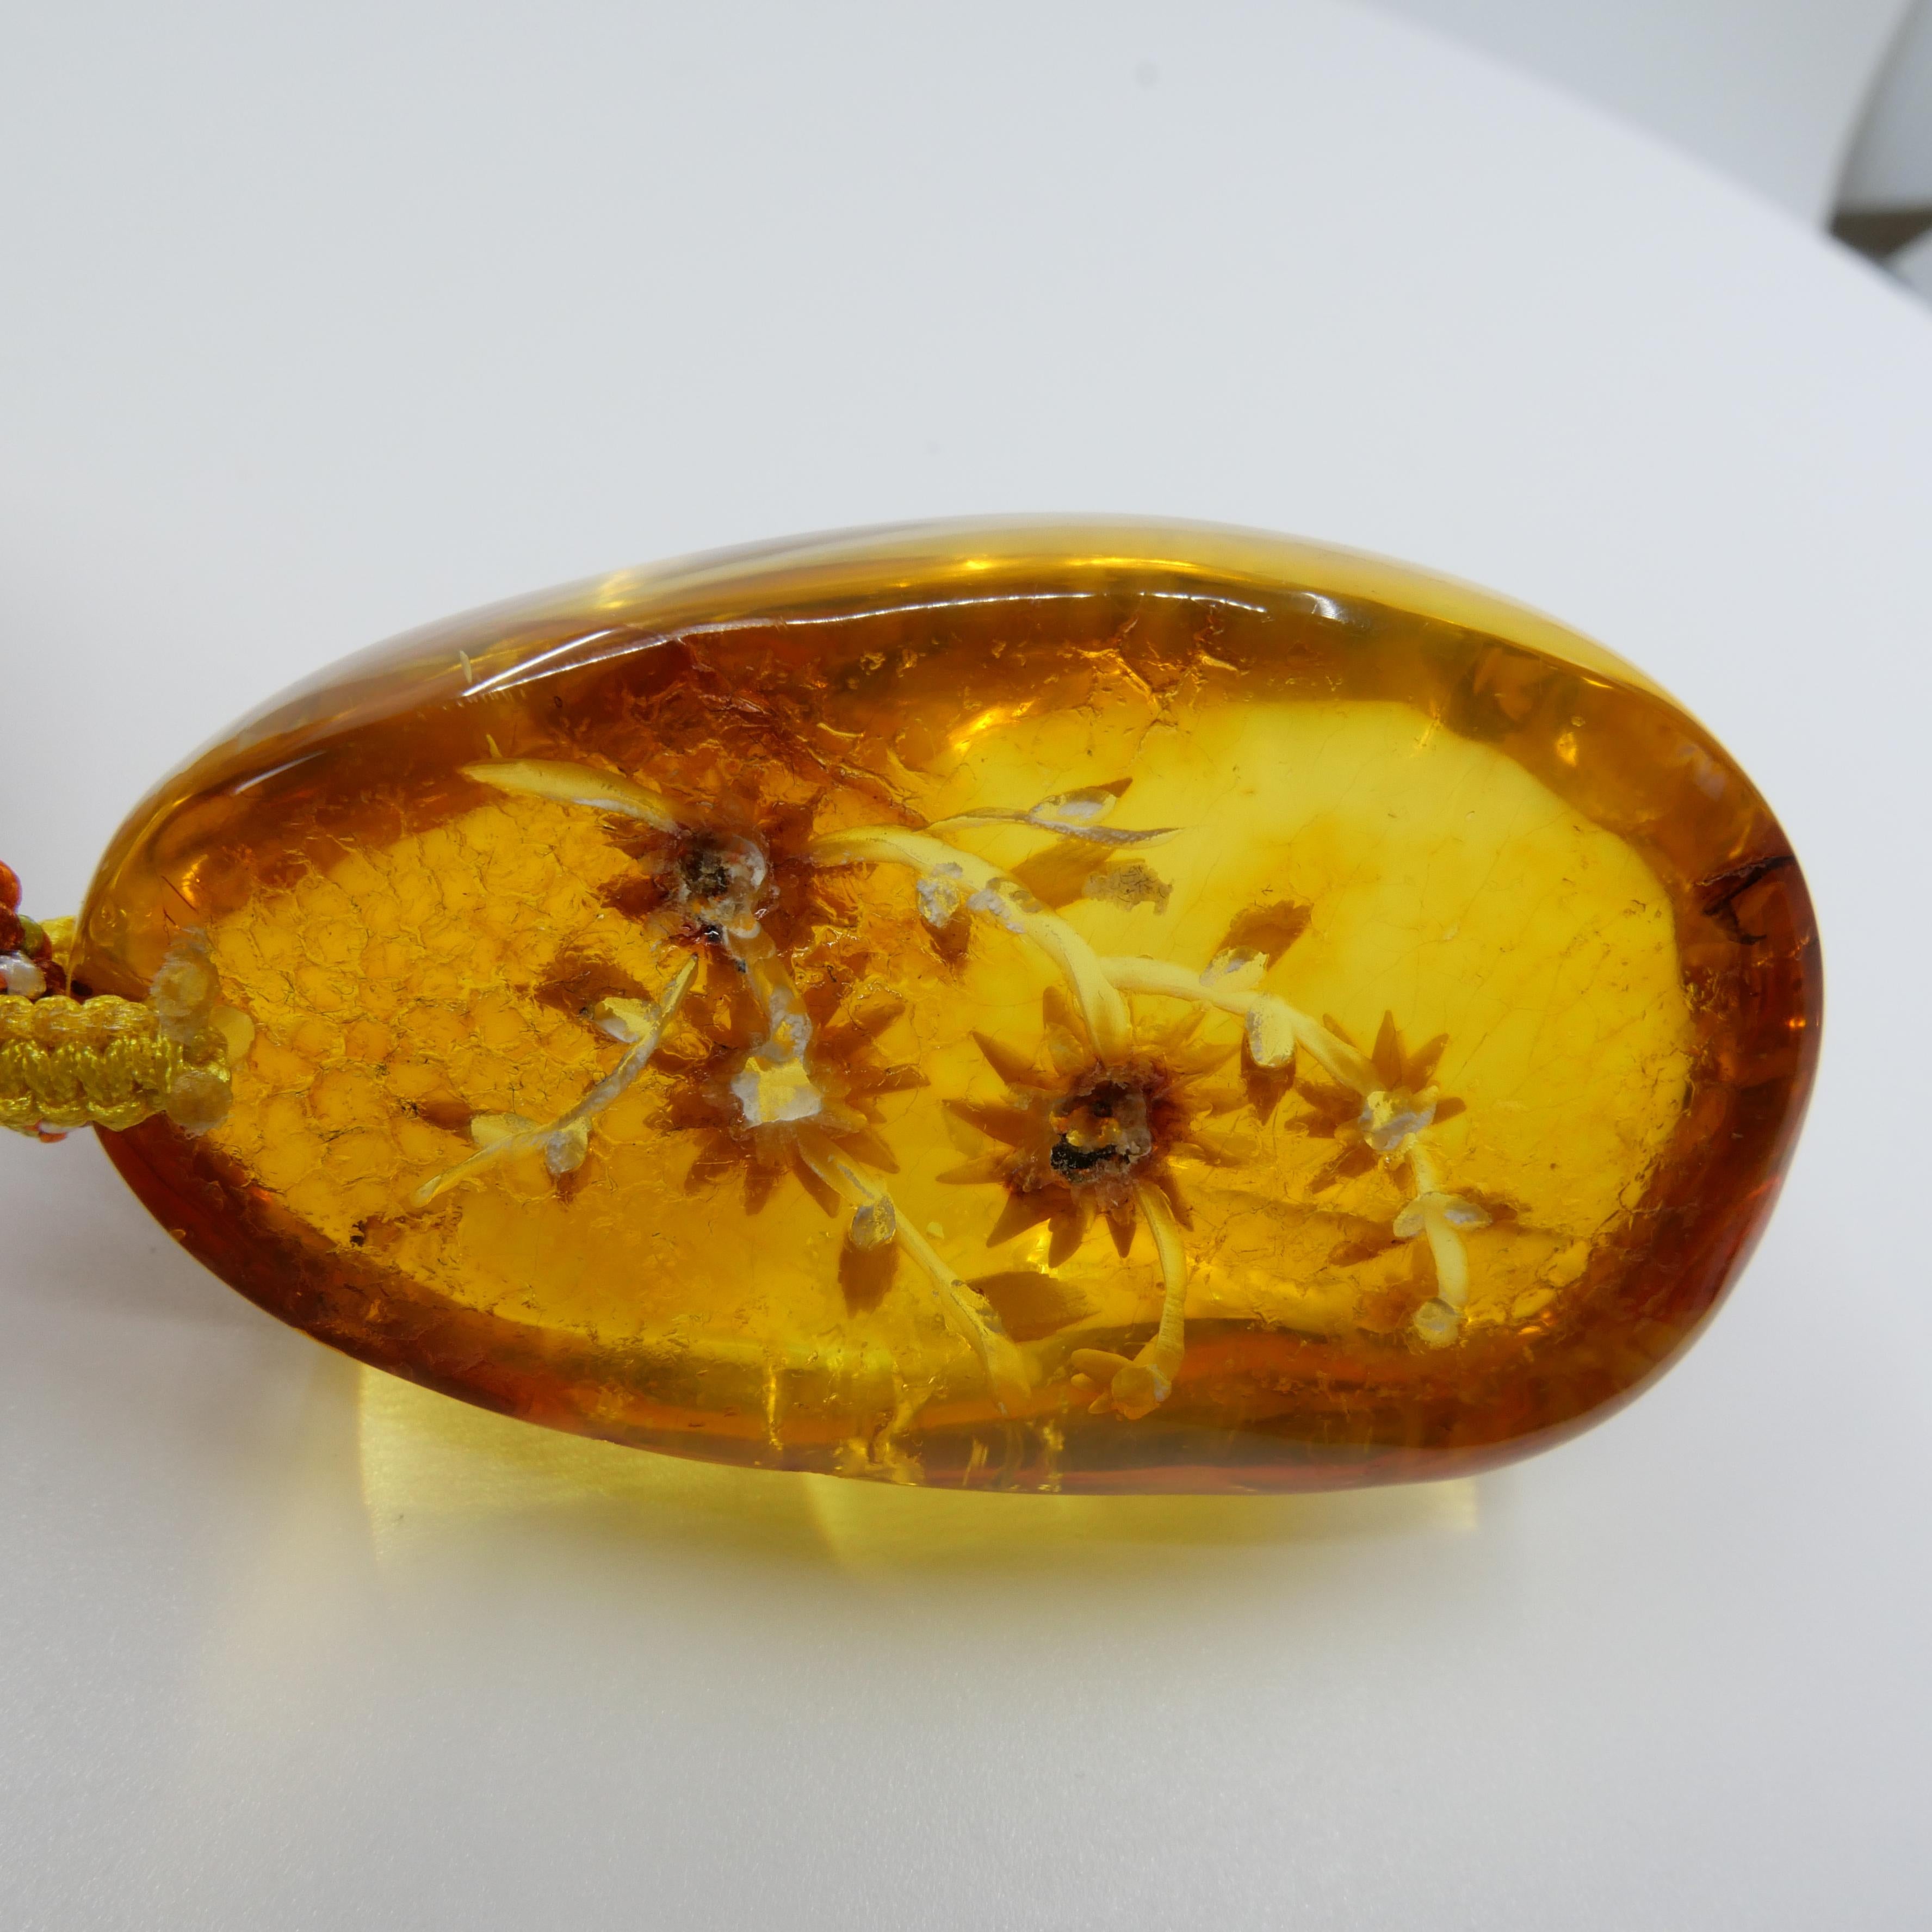 amber flower necklace